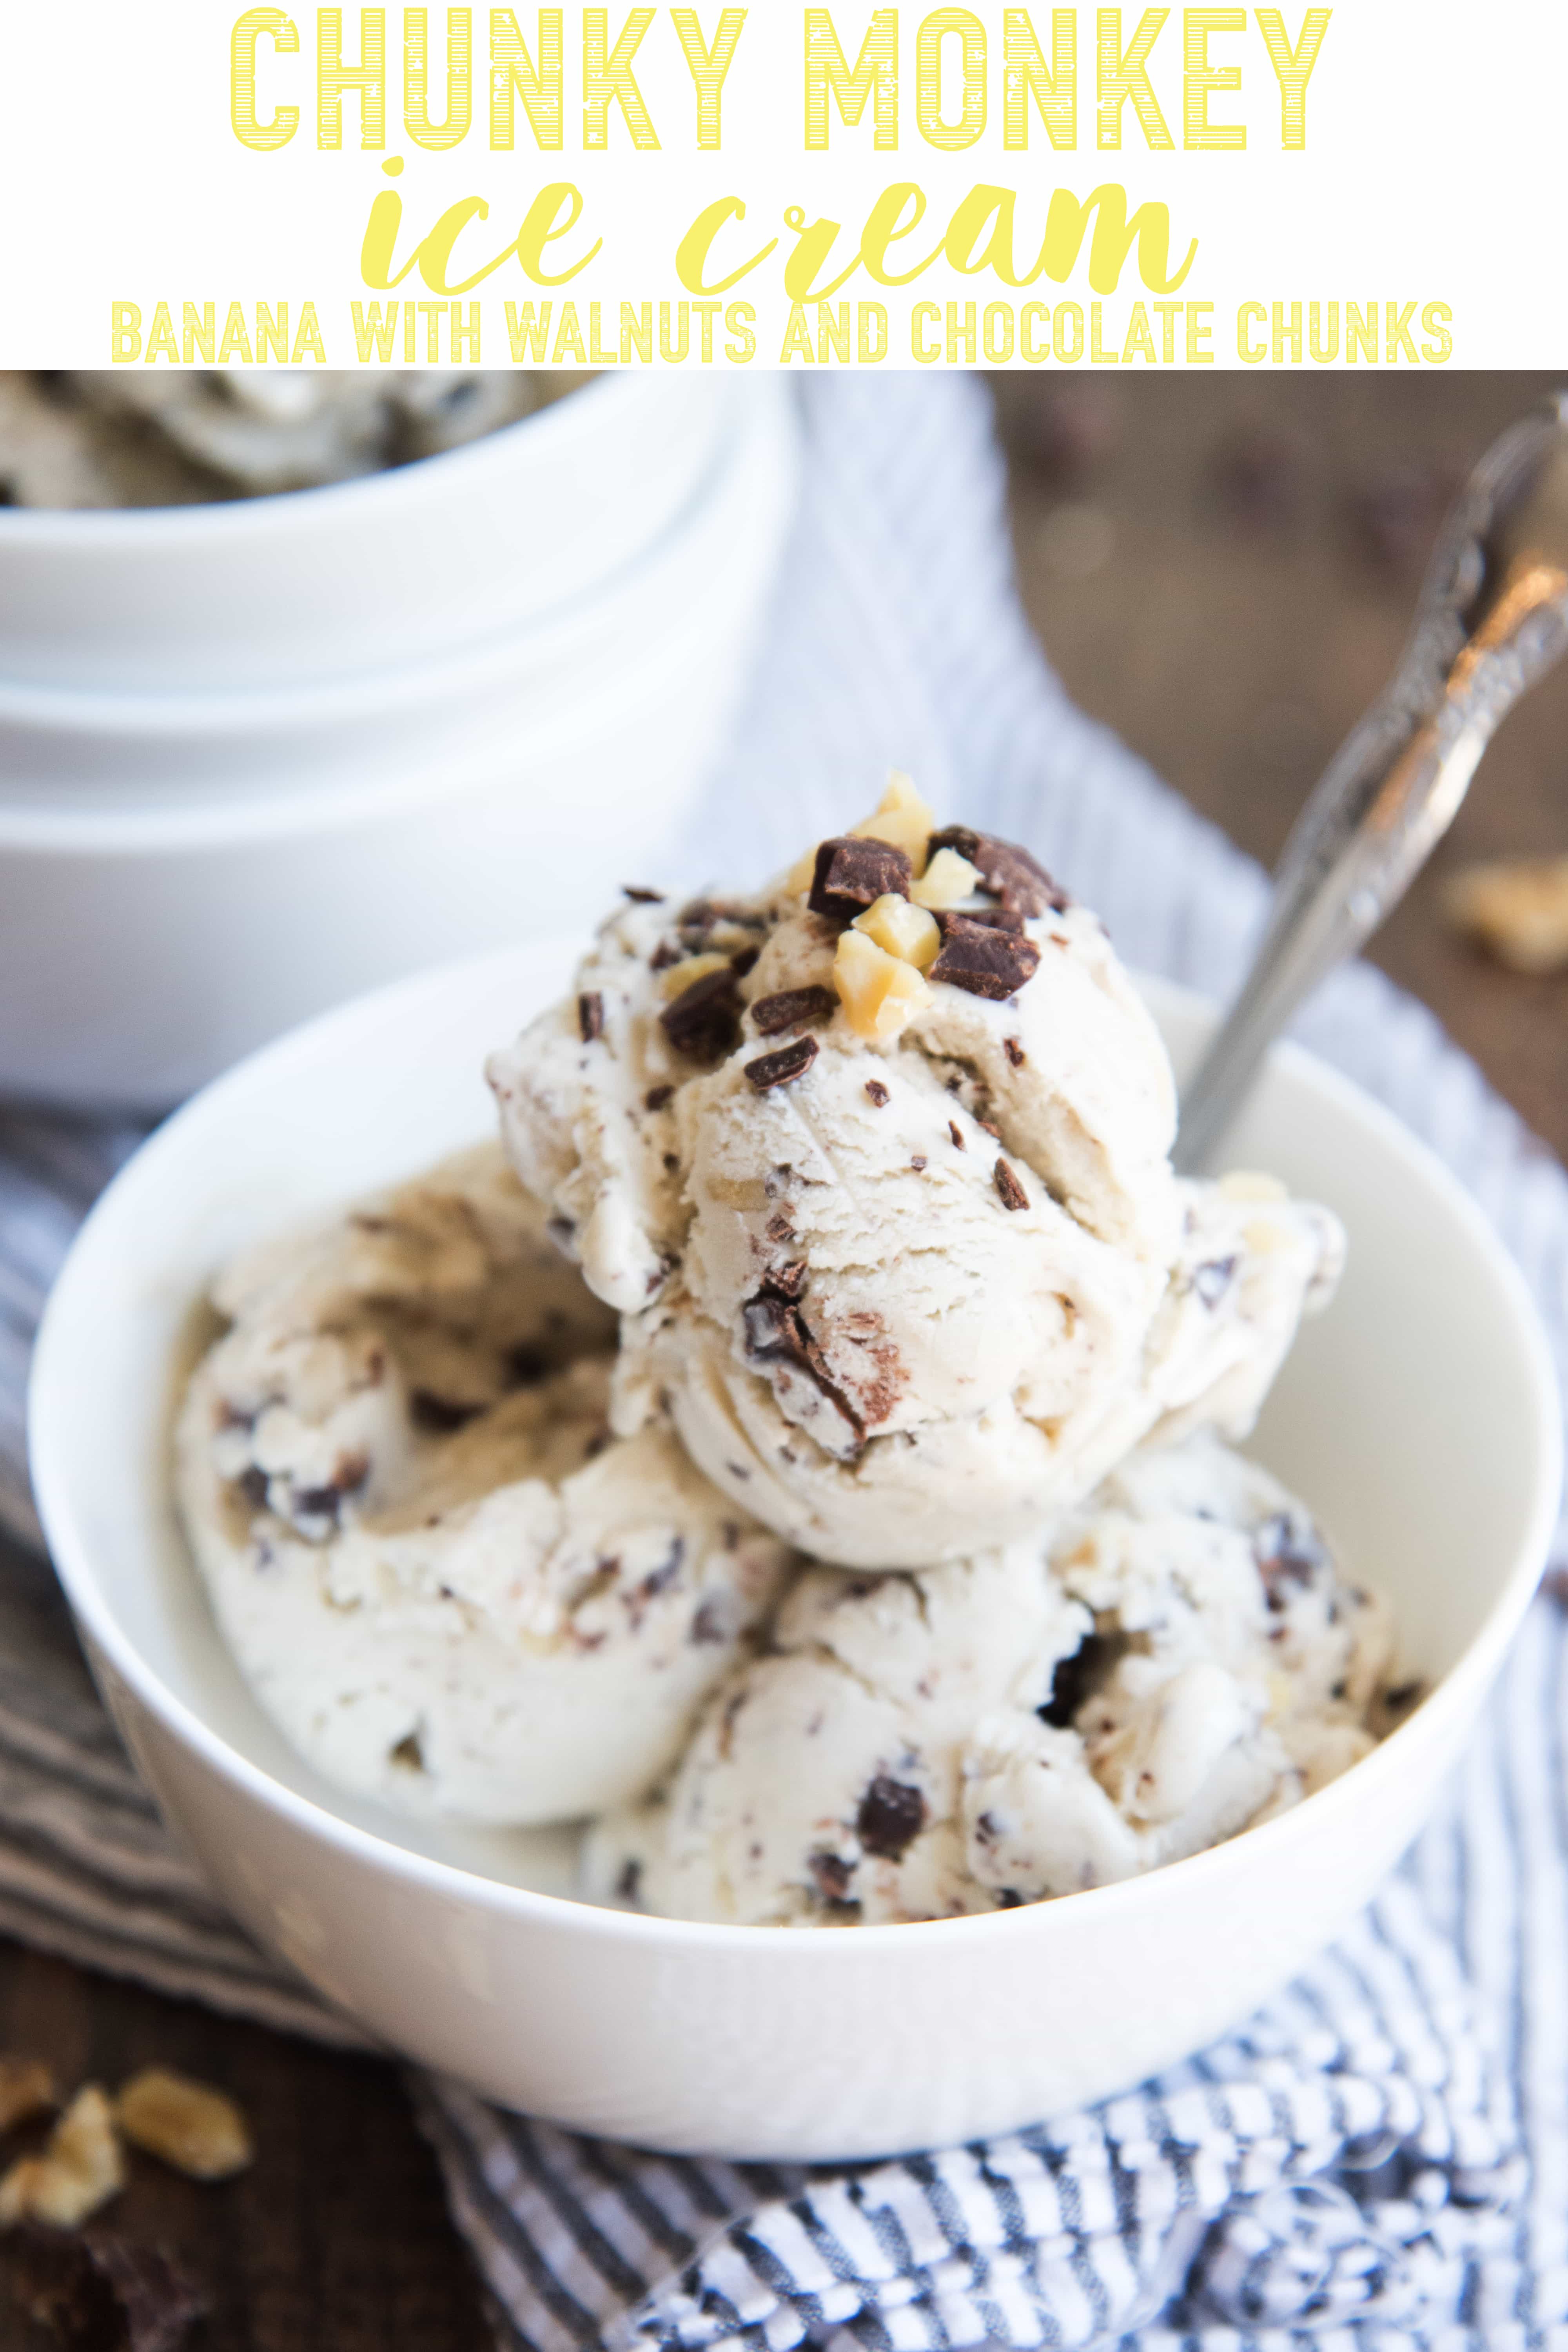 Homemade Chunky Monkey Ice Cream is a creamy banana ice cream full of chopped walnuts and chocolate, that tastes just like Ben and Jerry's!